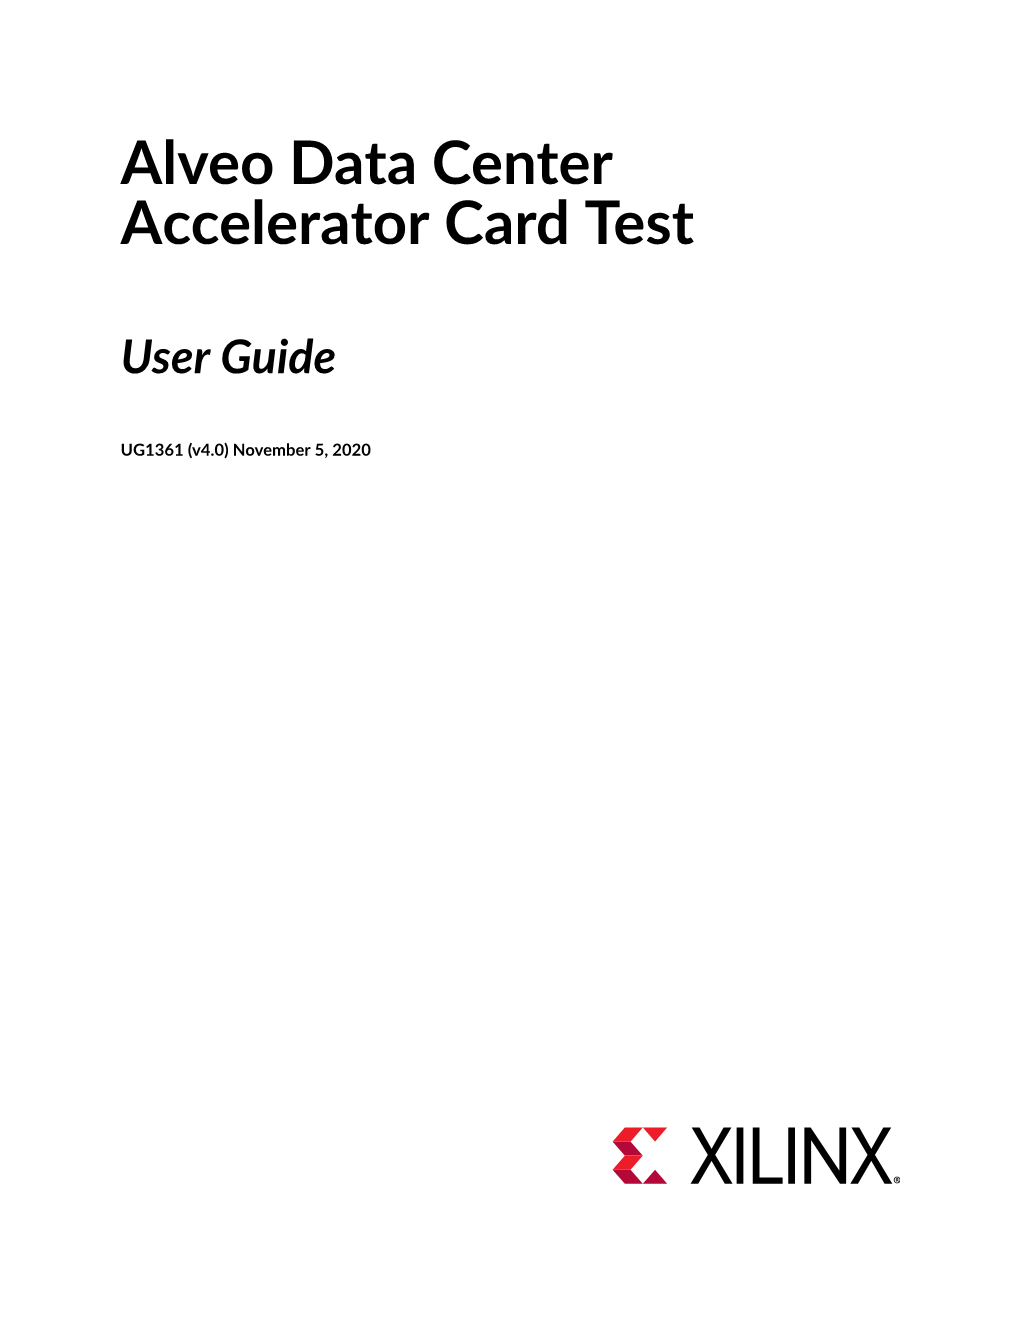 Alveo Data Center Accelerator Card Test User Guide 2 Table of Contents